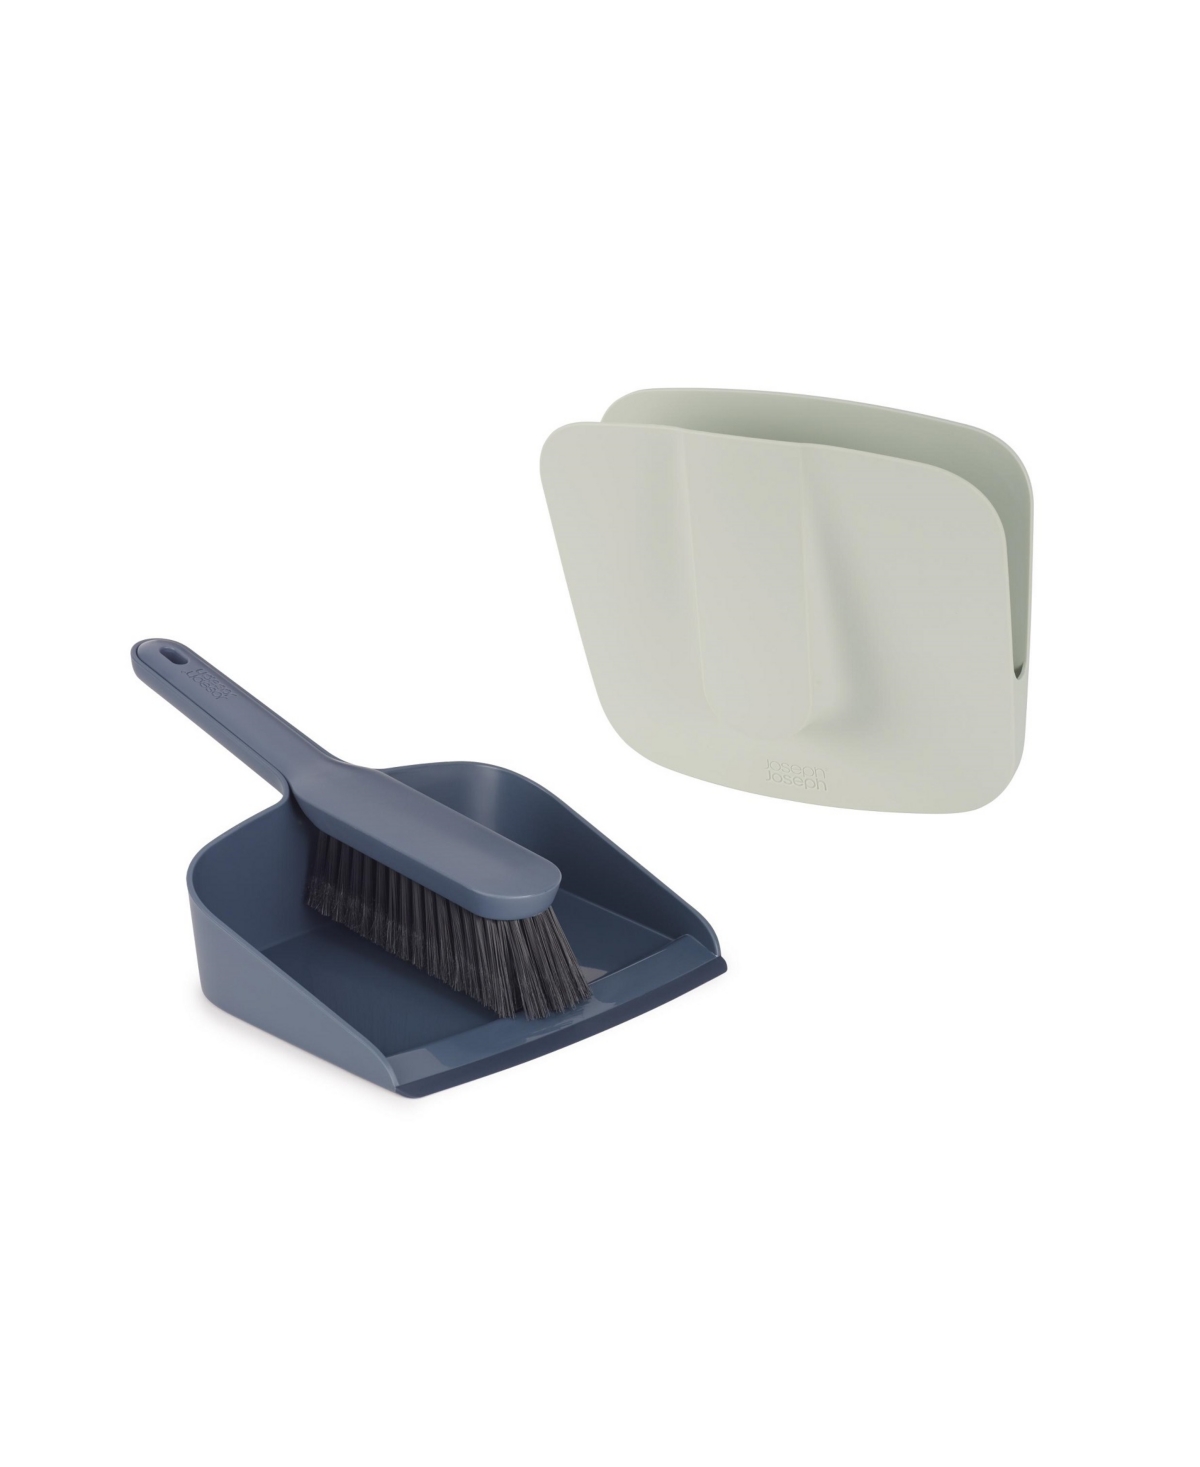 Joseph Joseph Cleanstore Wall-mounted Dustpan Brush With Dust-shield Storage In Blue